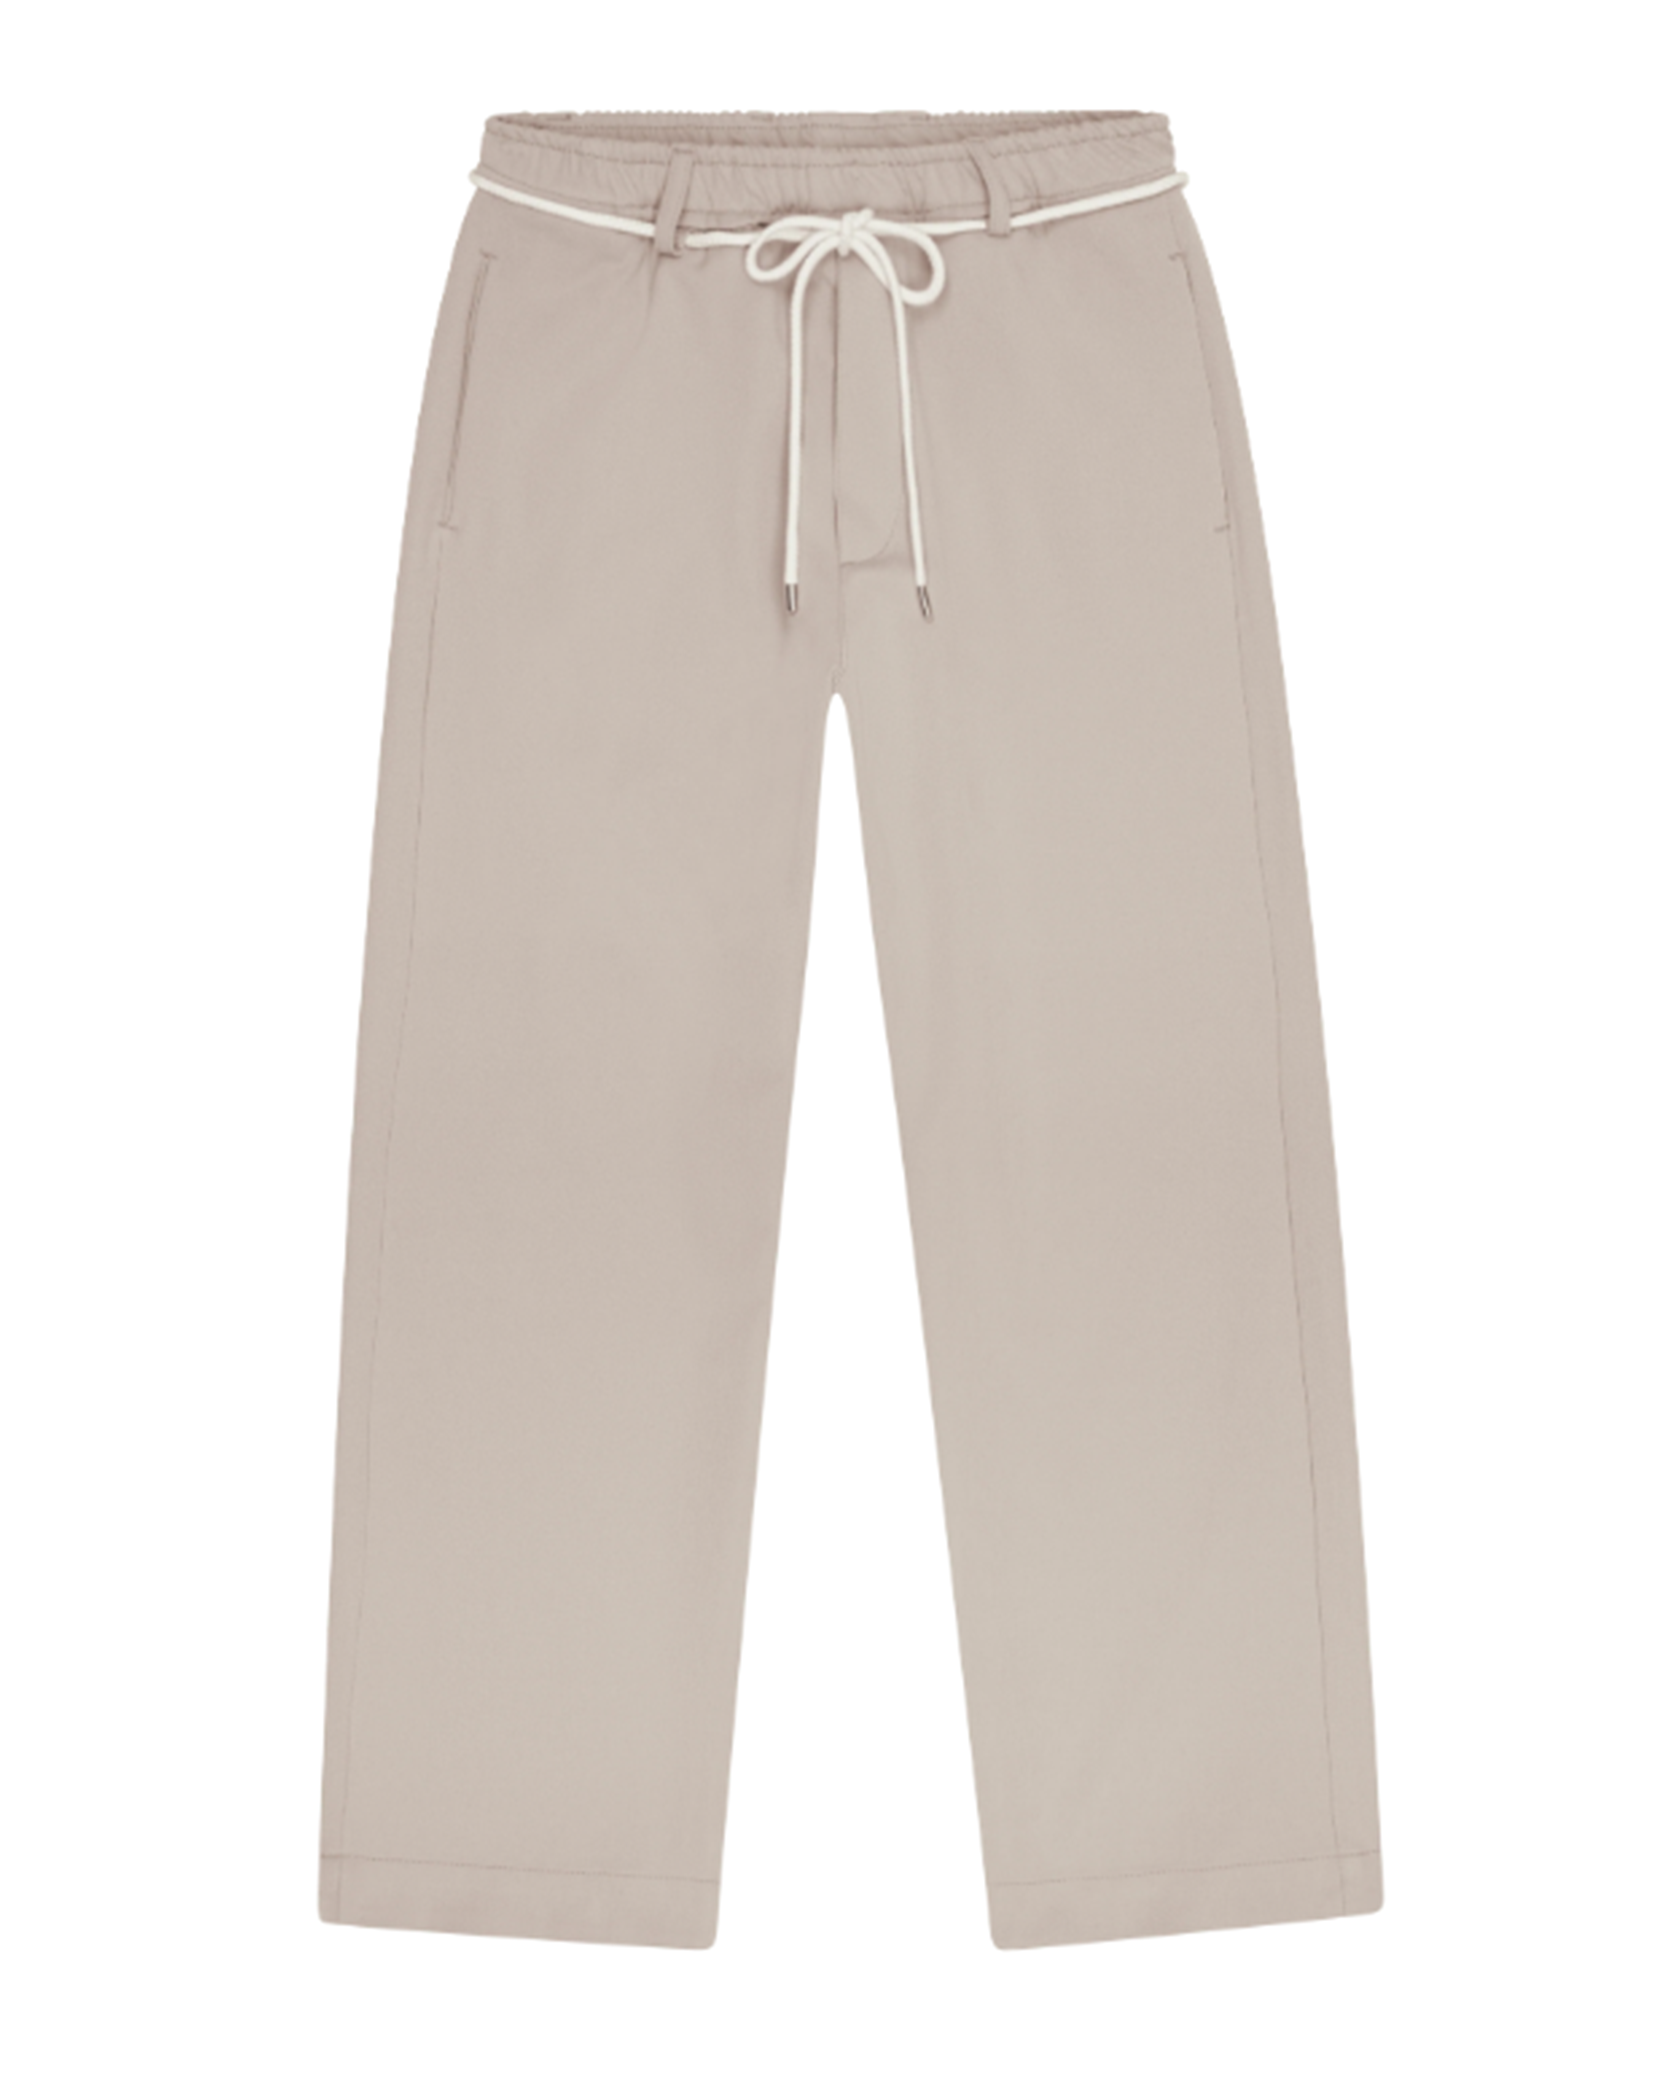 About blank - cropped trousers dark sand